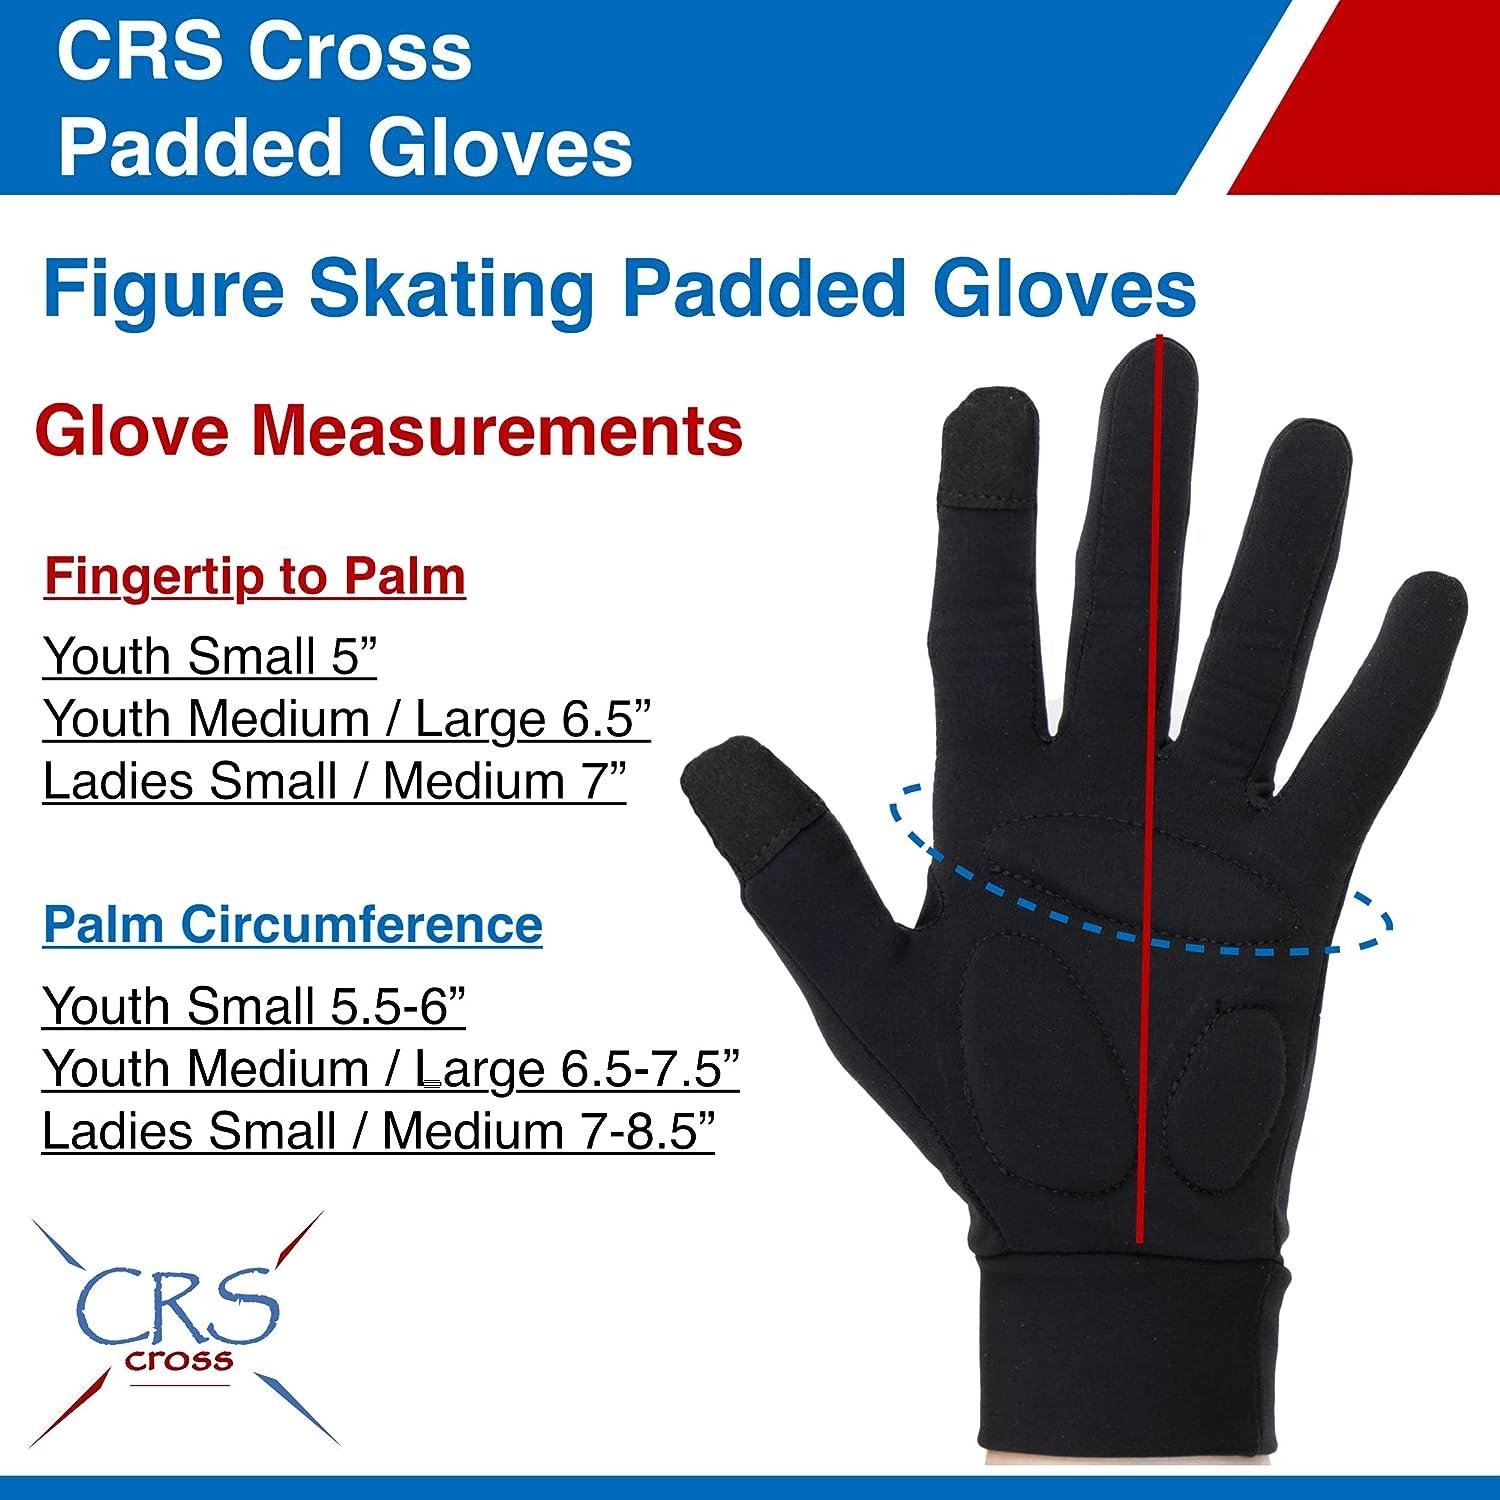 CRS Cross Padded Skating Gloves - Warm Padded Protection for Ice Skating  Practice, Figure Skating Testing, Dance Competition, Roller Skating and  Cheer. (Black, Ladies - Small/Medium)